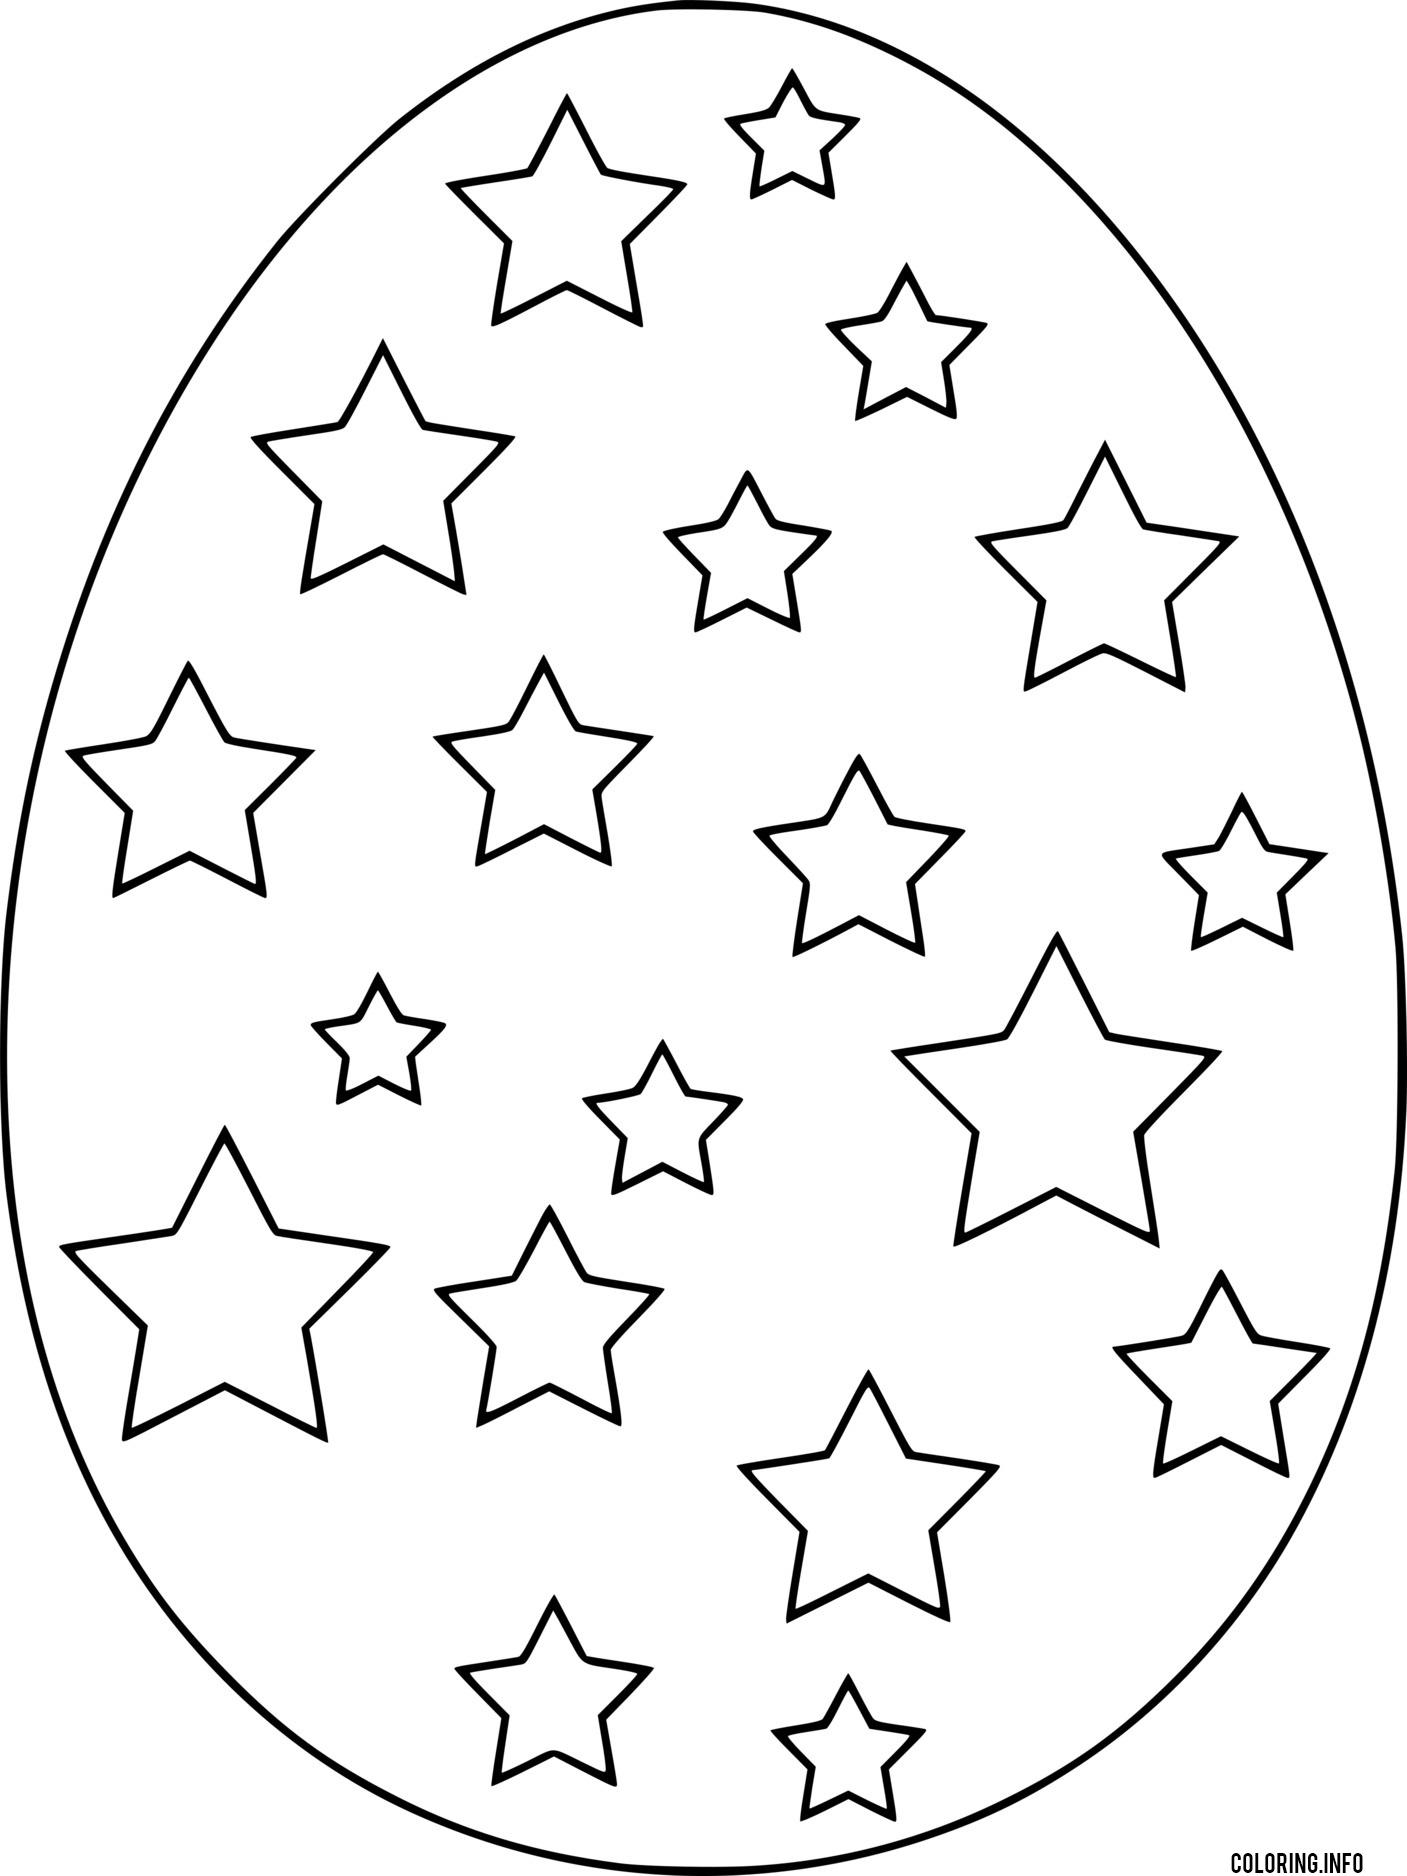 Easter Egg With Small Stars coloring